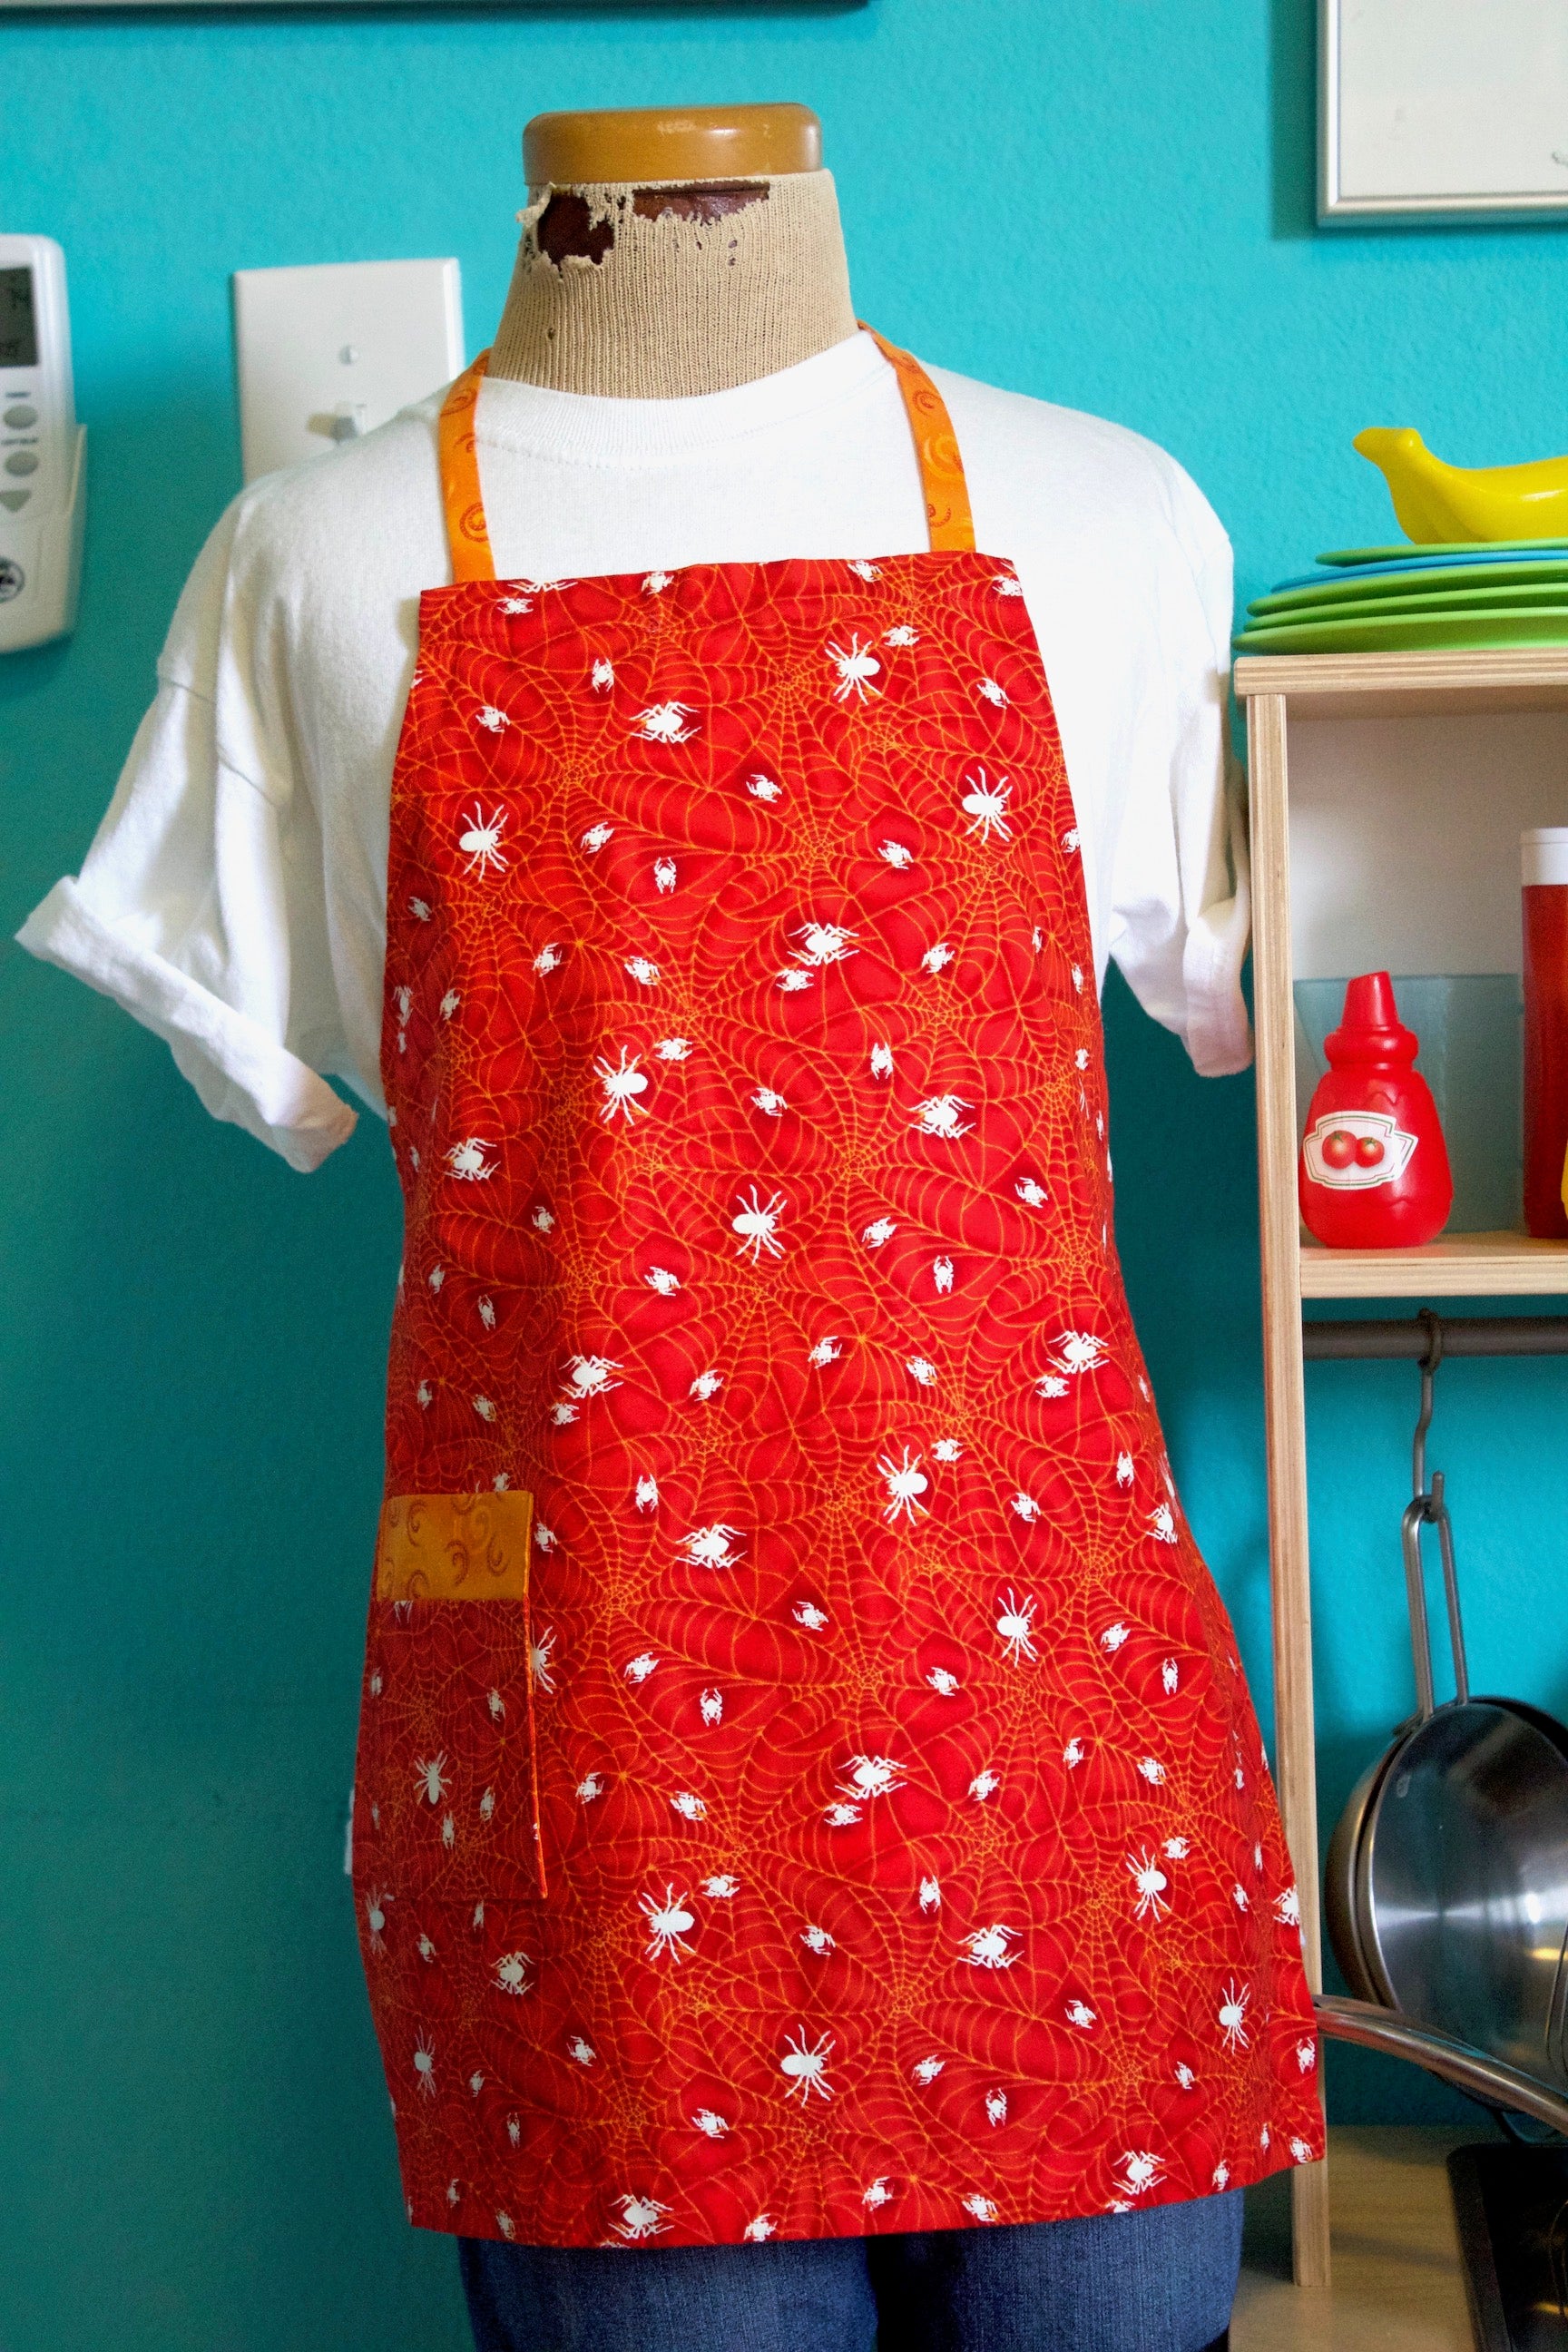 Spider's Web Kid's Apron - Red-The Blue Peony-Age Group_Kids,Category_Apron,Color_Red,Department_Kitchen,Material_Cotton,Size_Small (ages up to 5),Theme_Animal,Theme_Fall,Theme_Halloween